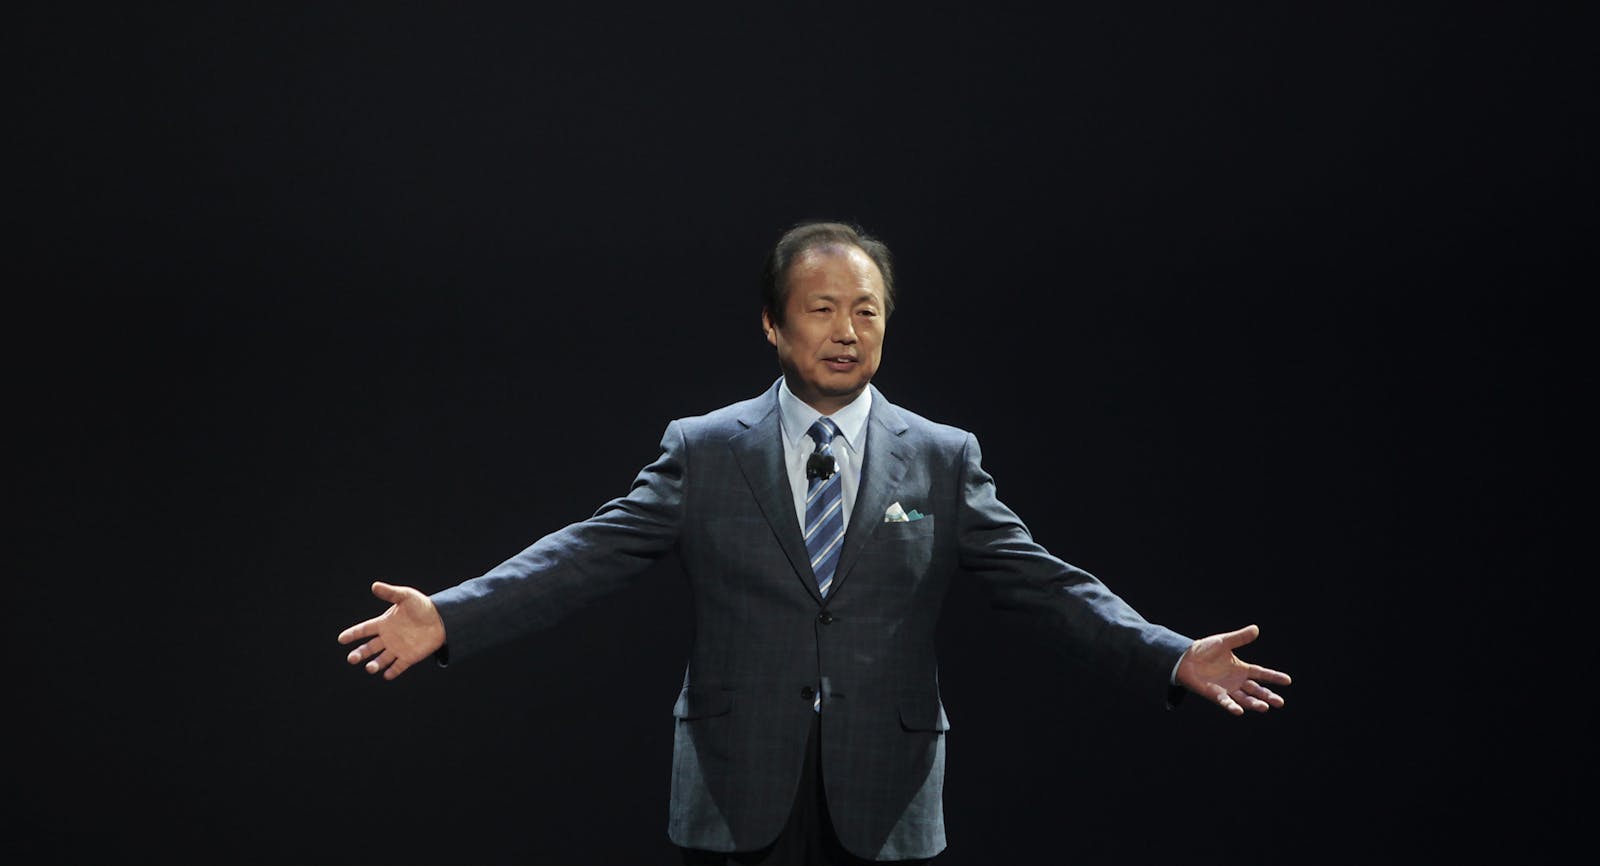 Samsung’s mobile CEO J.K. Shin. Photo by Bloomberg.